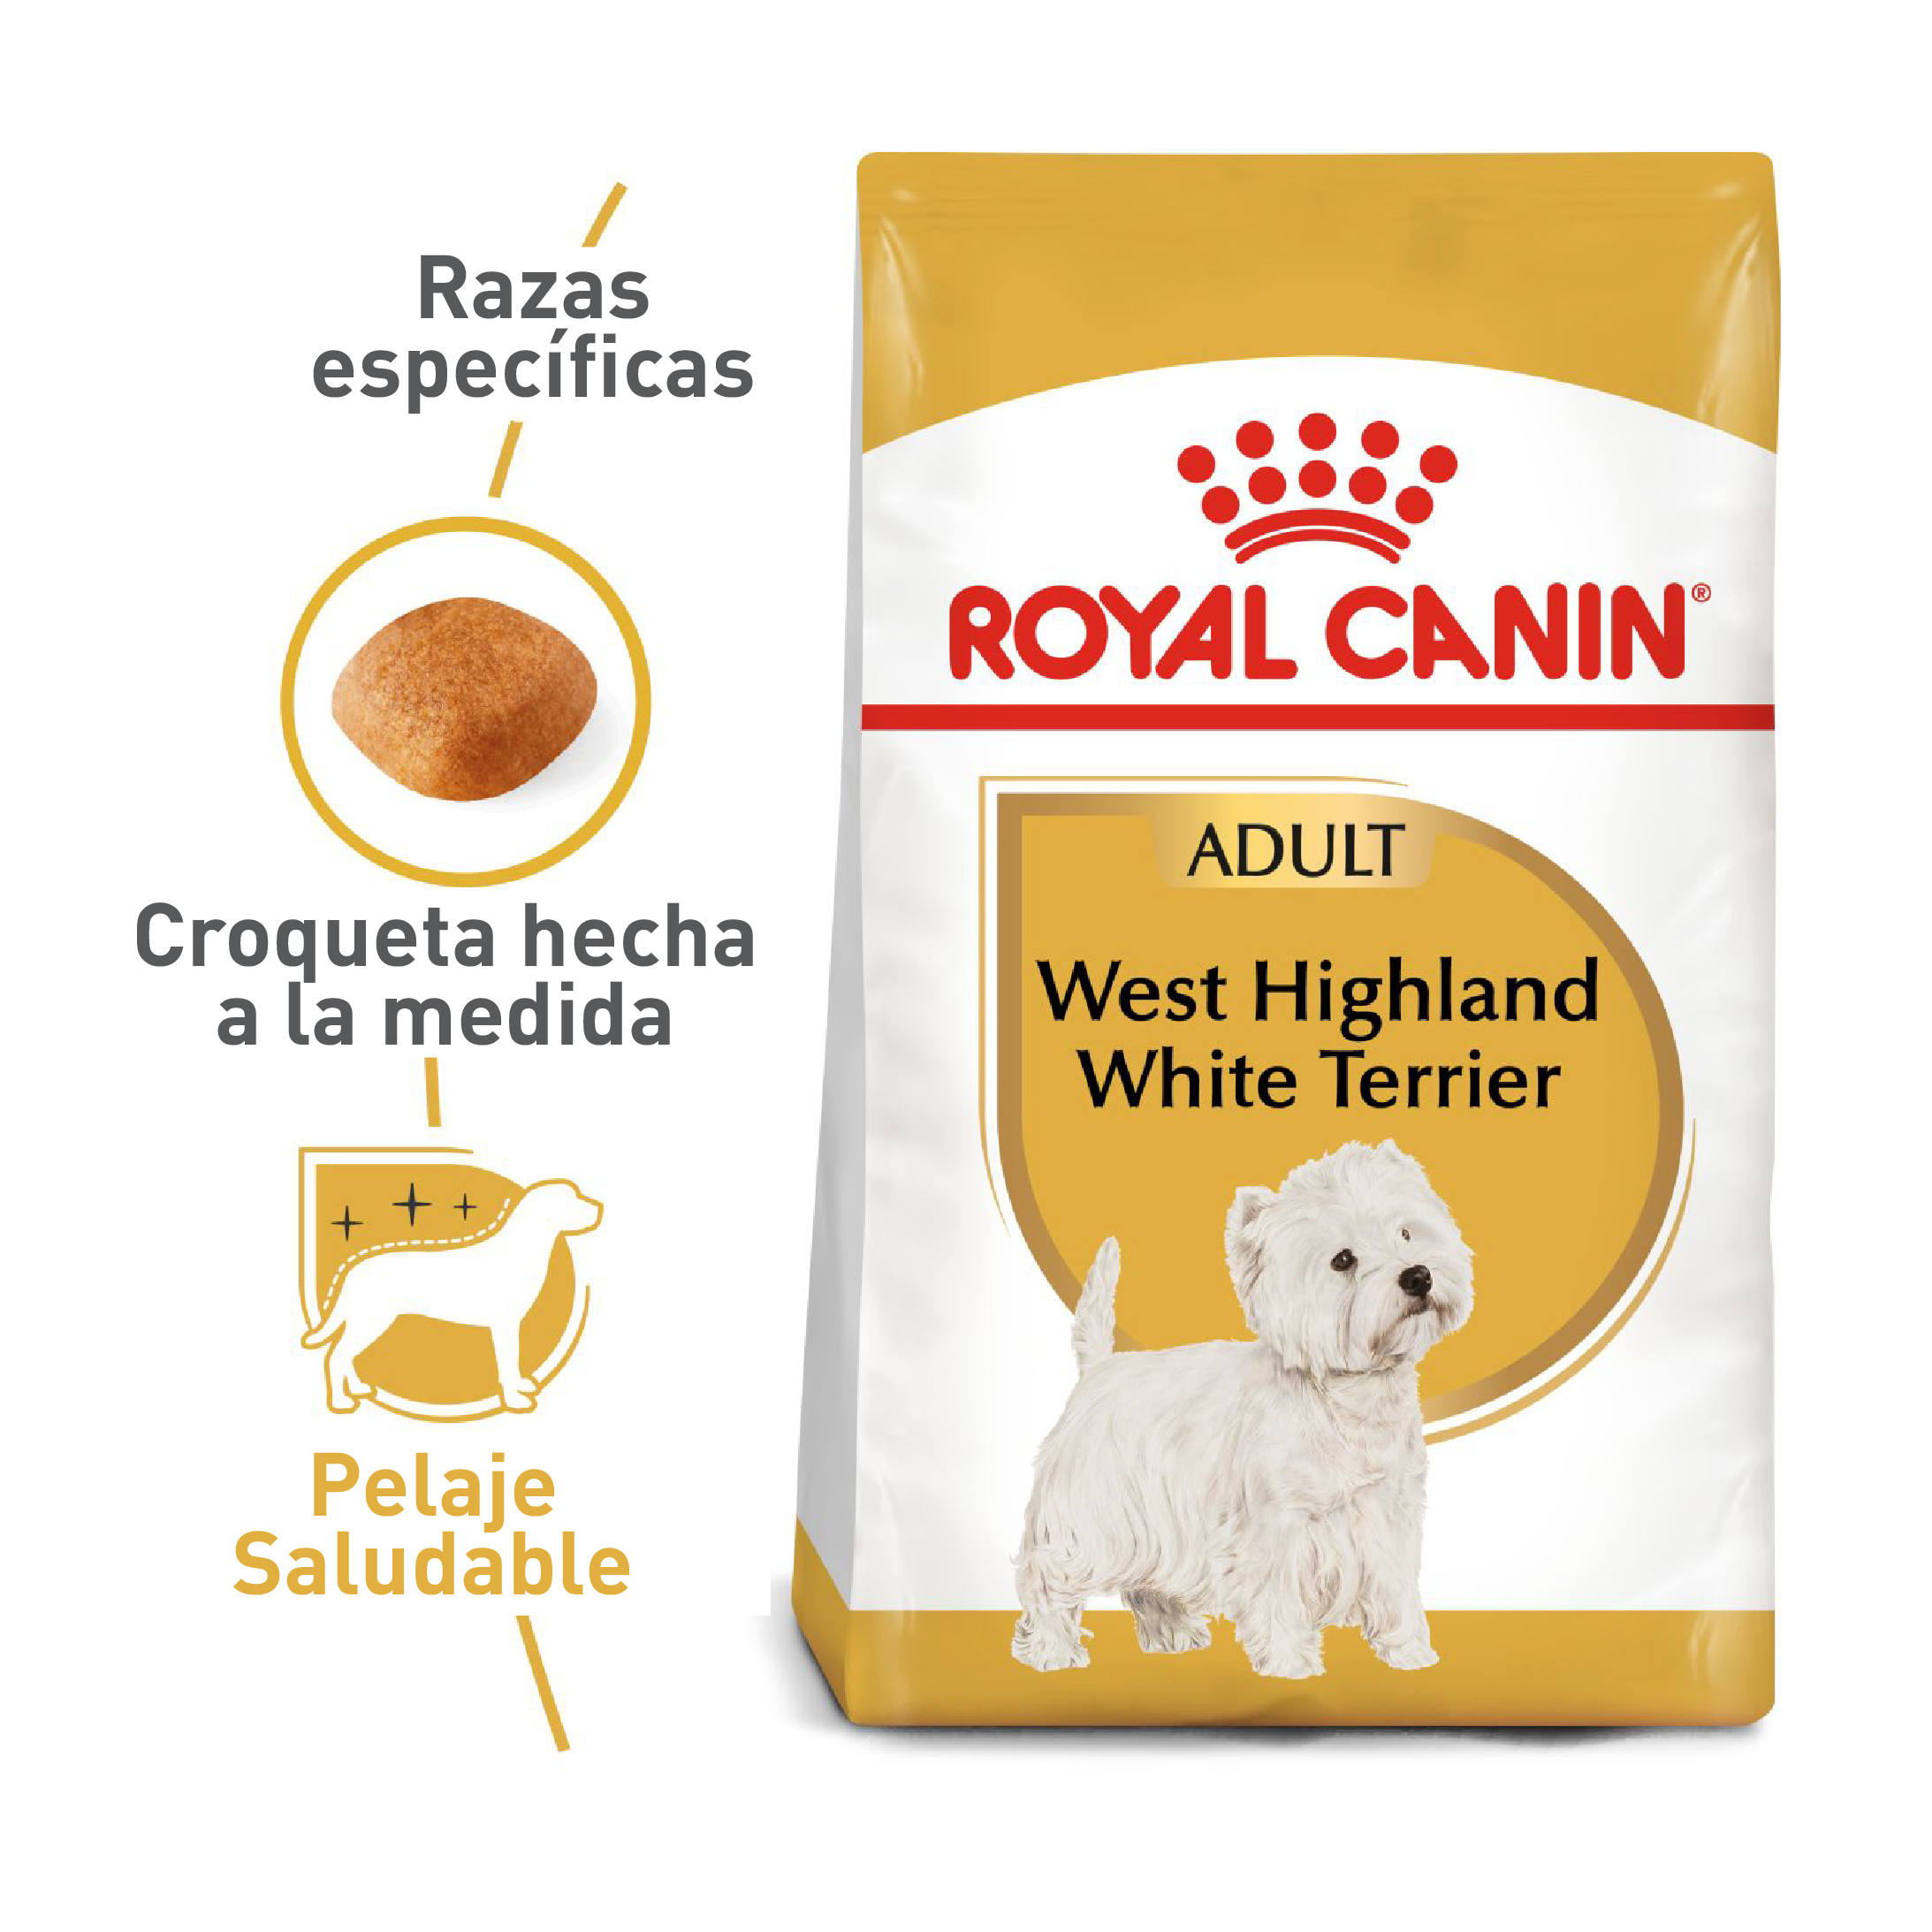 Royal Canin - West Highland White Terrier Adult